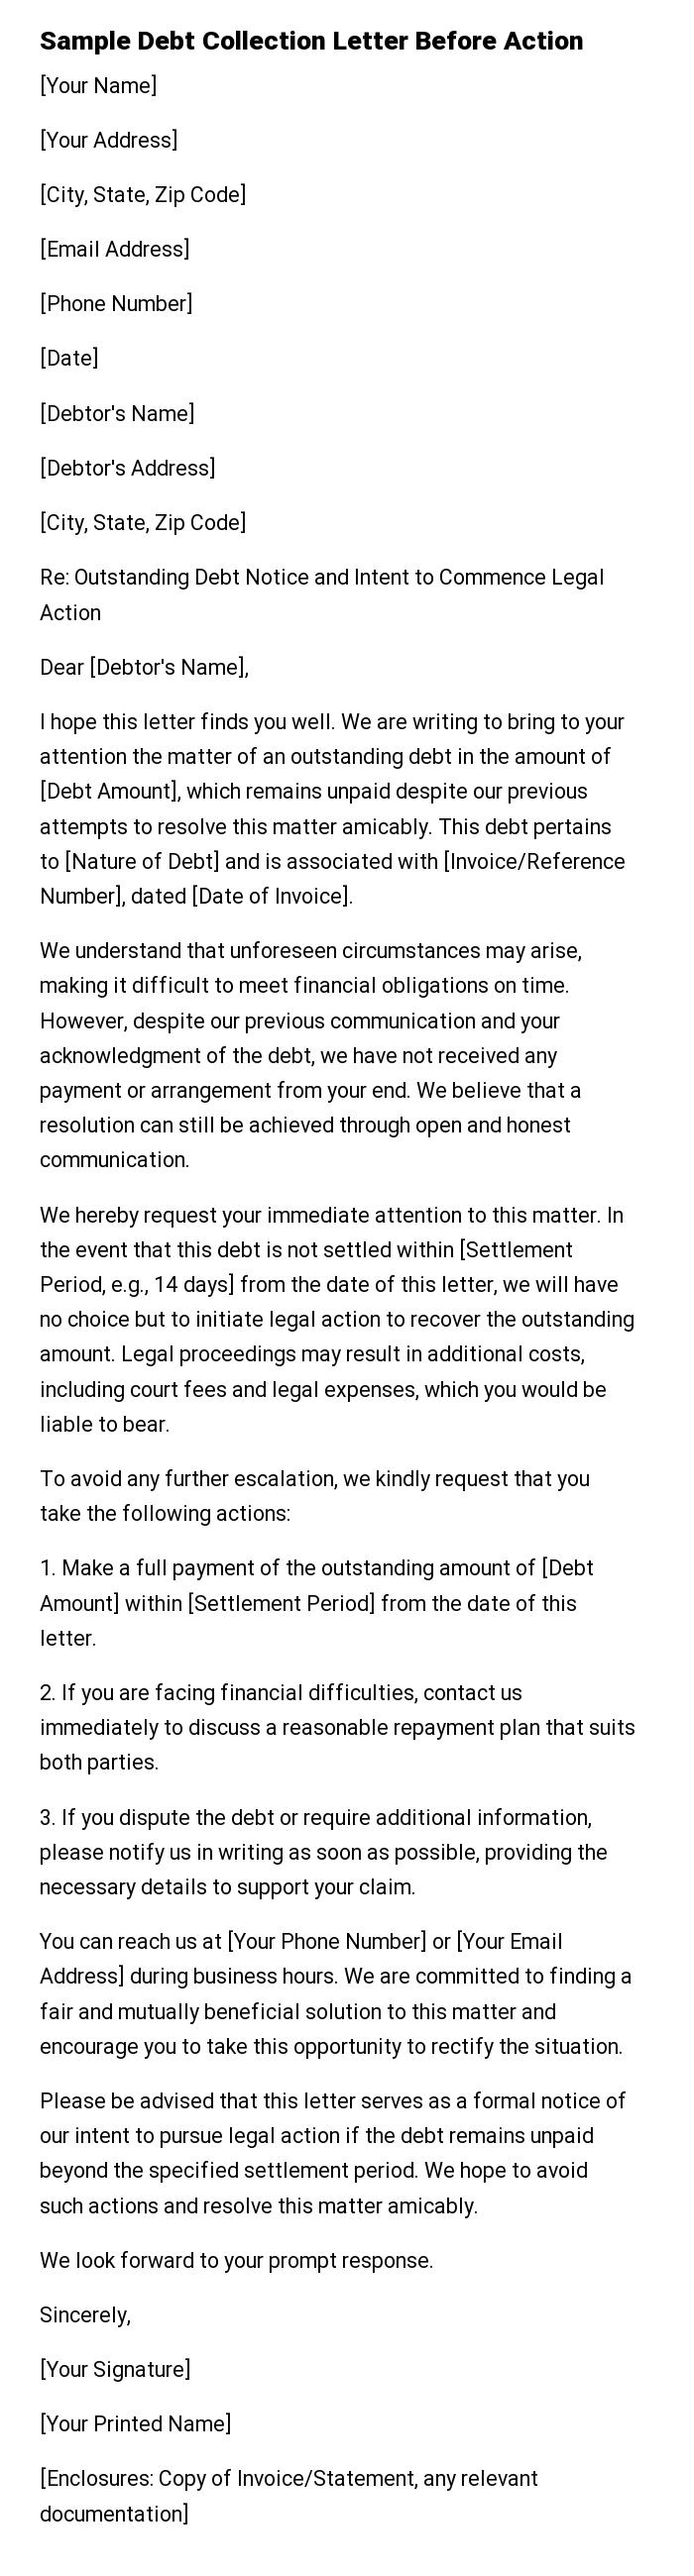 Sample Debt Collection Letter Before Action